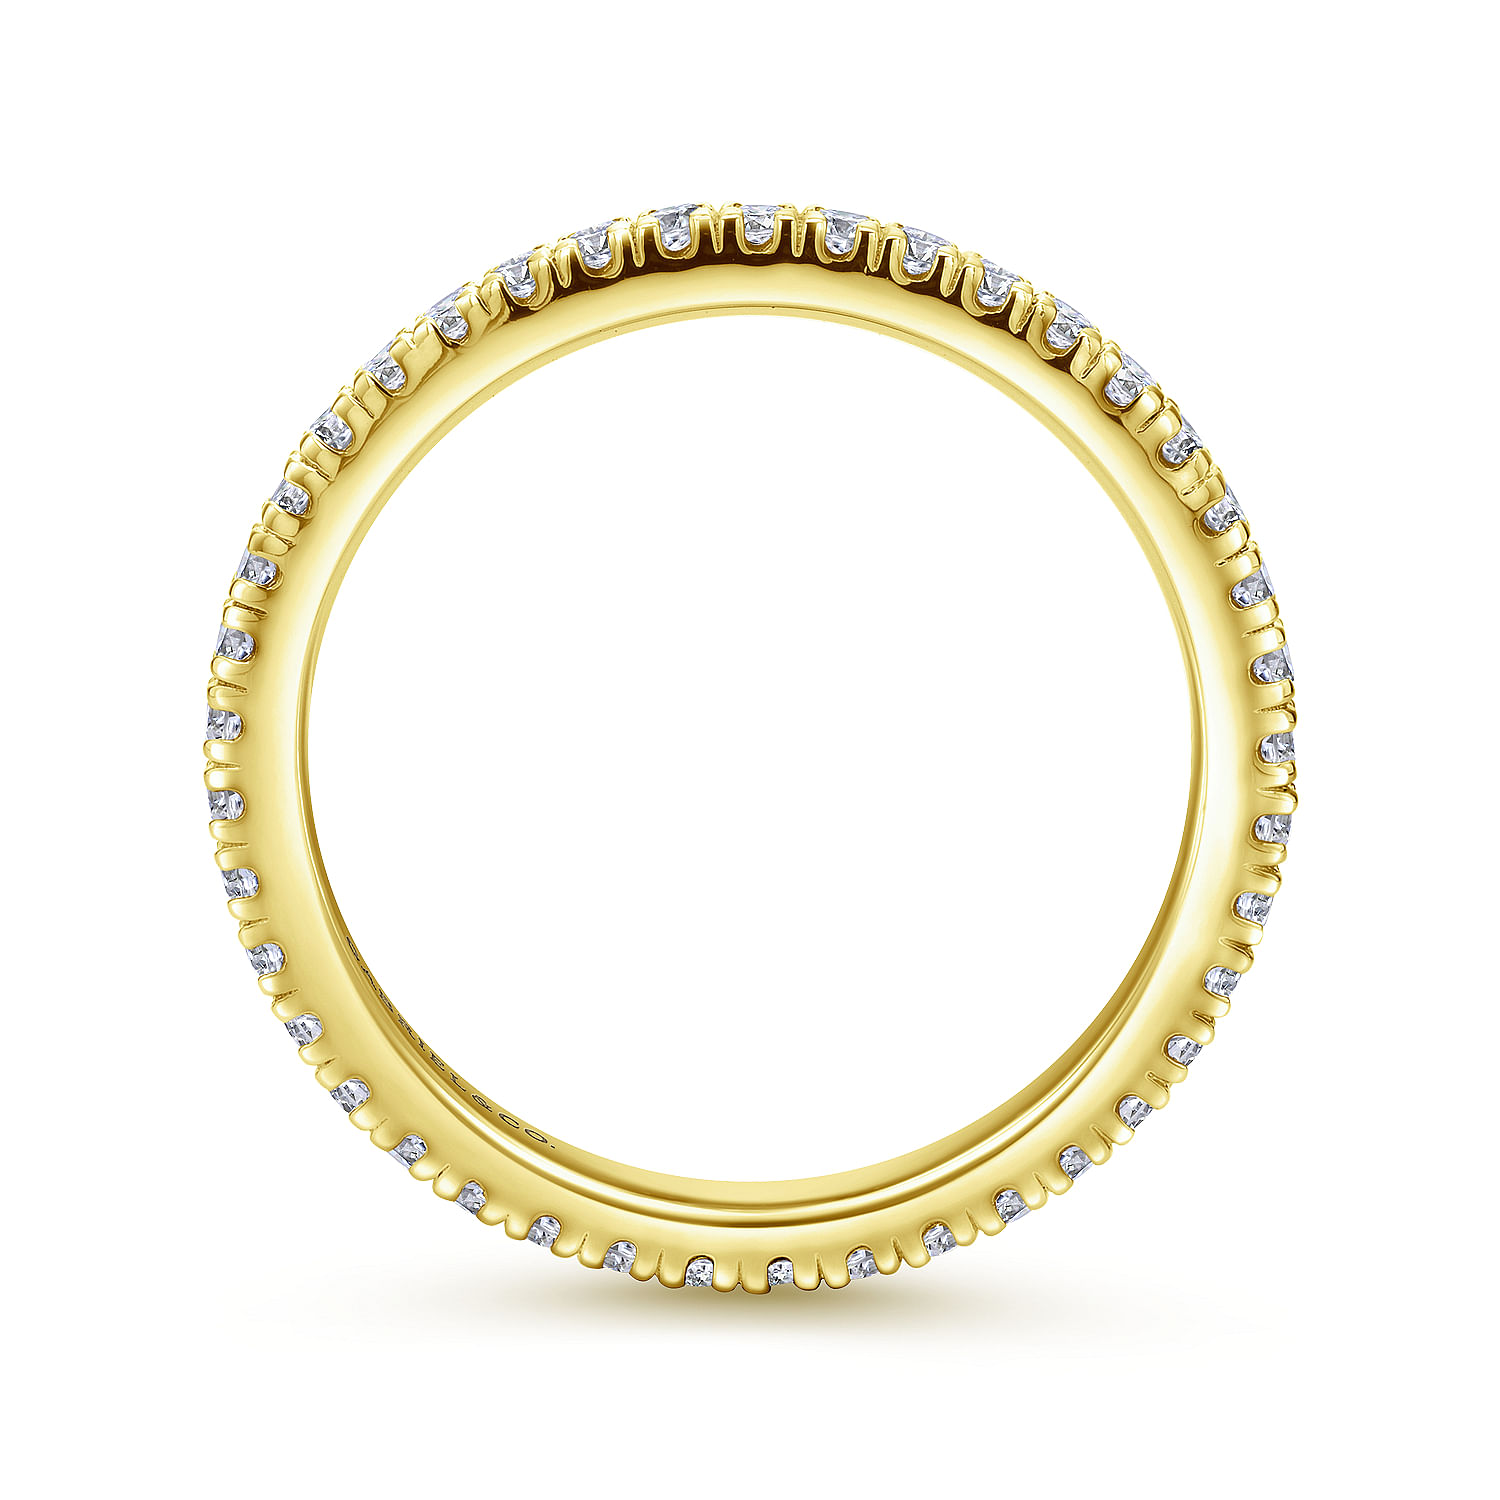 French Pave  Eternity Diamond Ring in 14K Yellow Gold